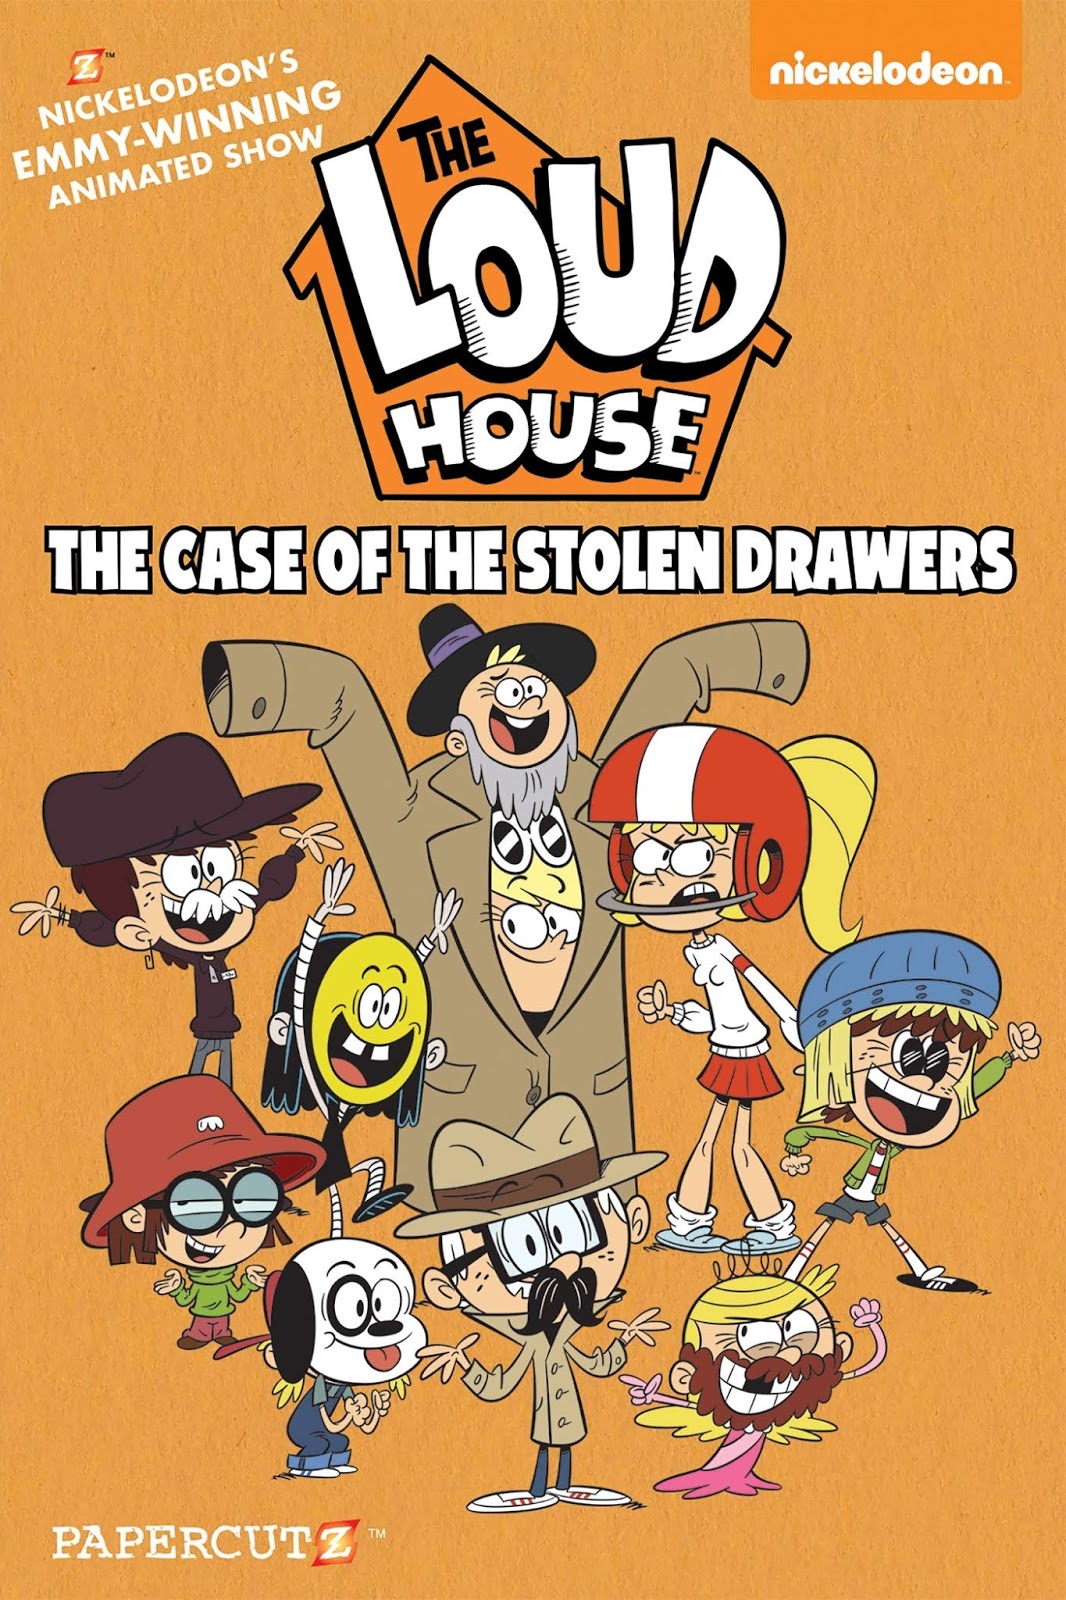 Nickalive Papercutz To Release The Loud House 12 The Case Of The Stolen Drawers On Tuesday 